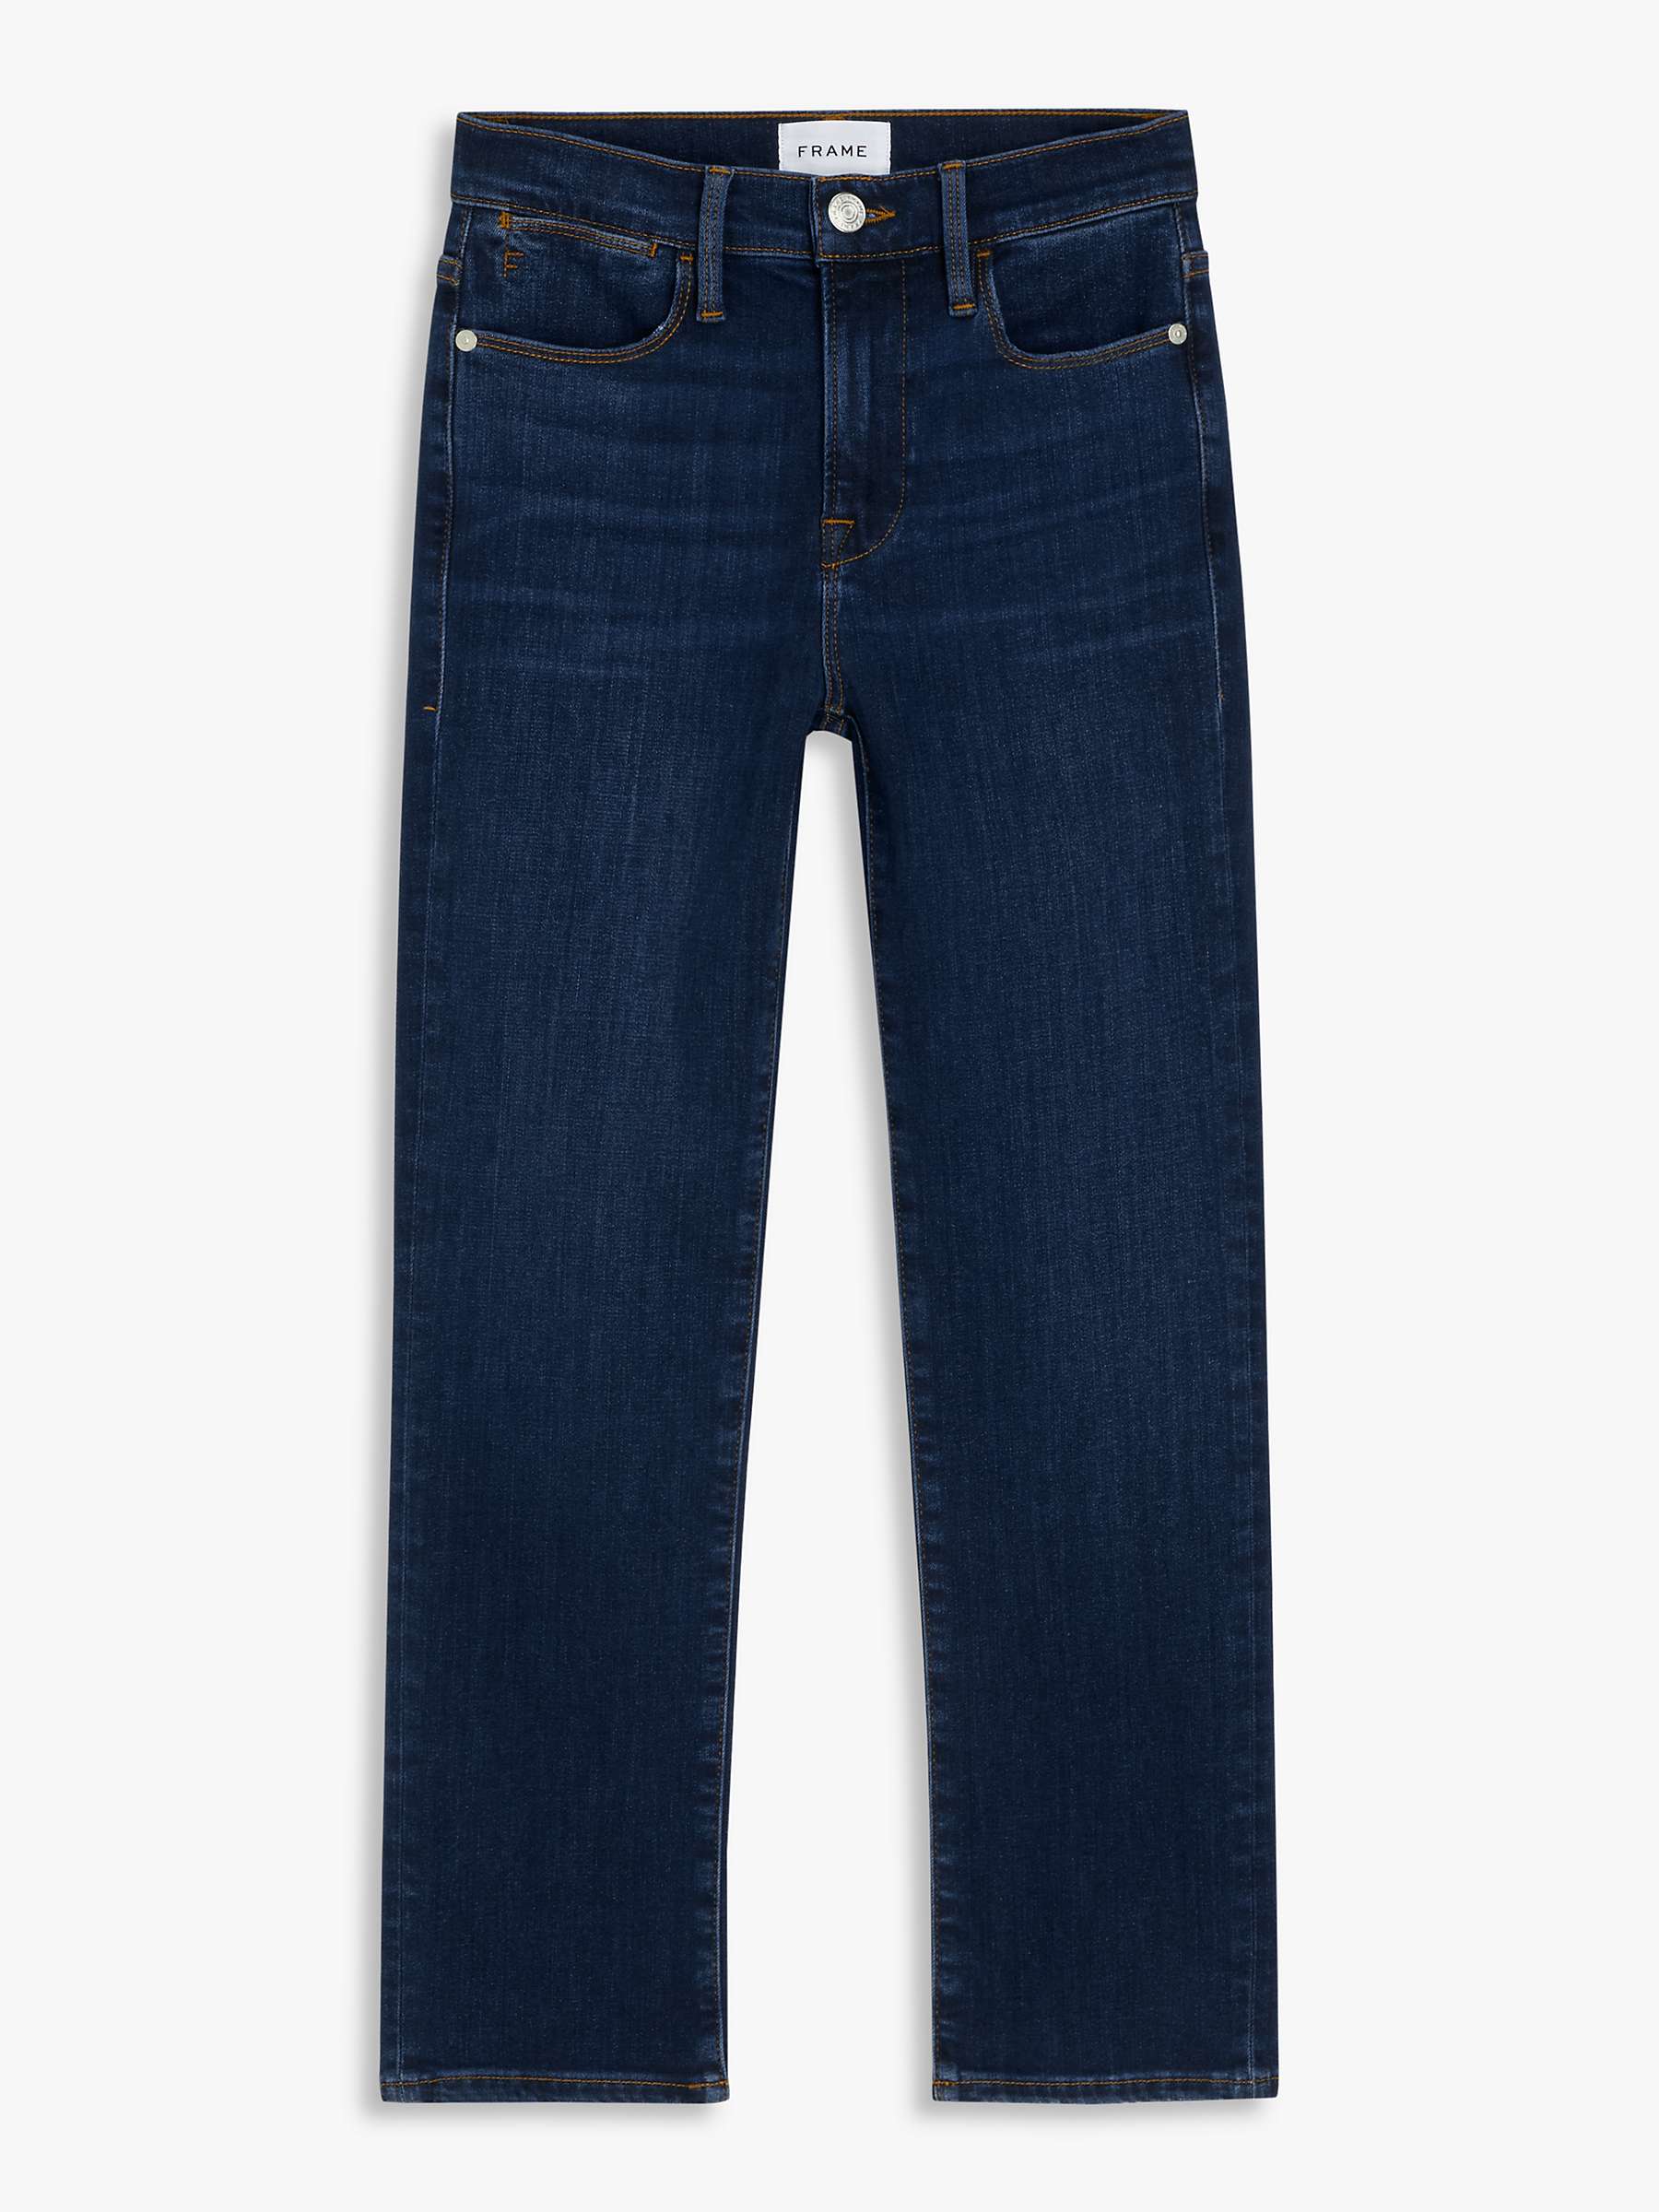 Buy FRAME Le High Straight Leg Jeans, Majesty Online at johnlewis.com